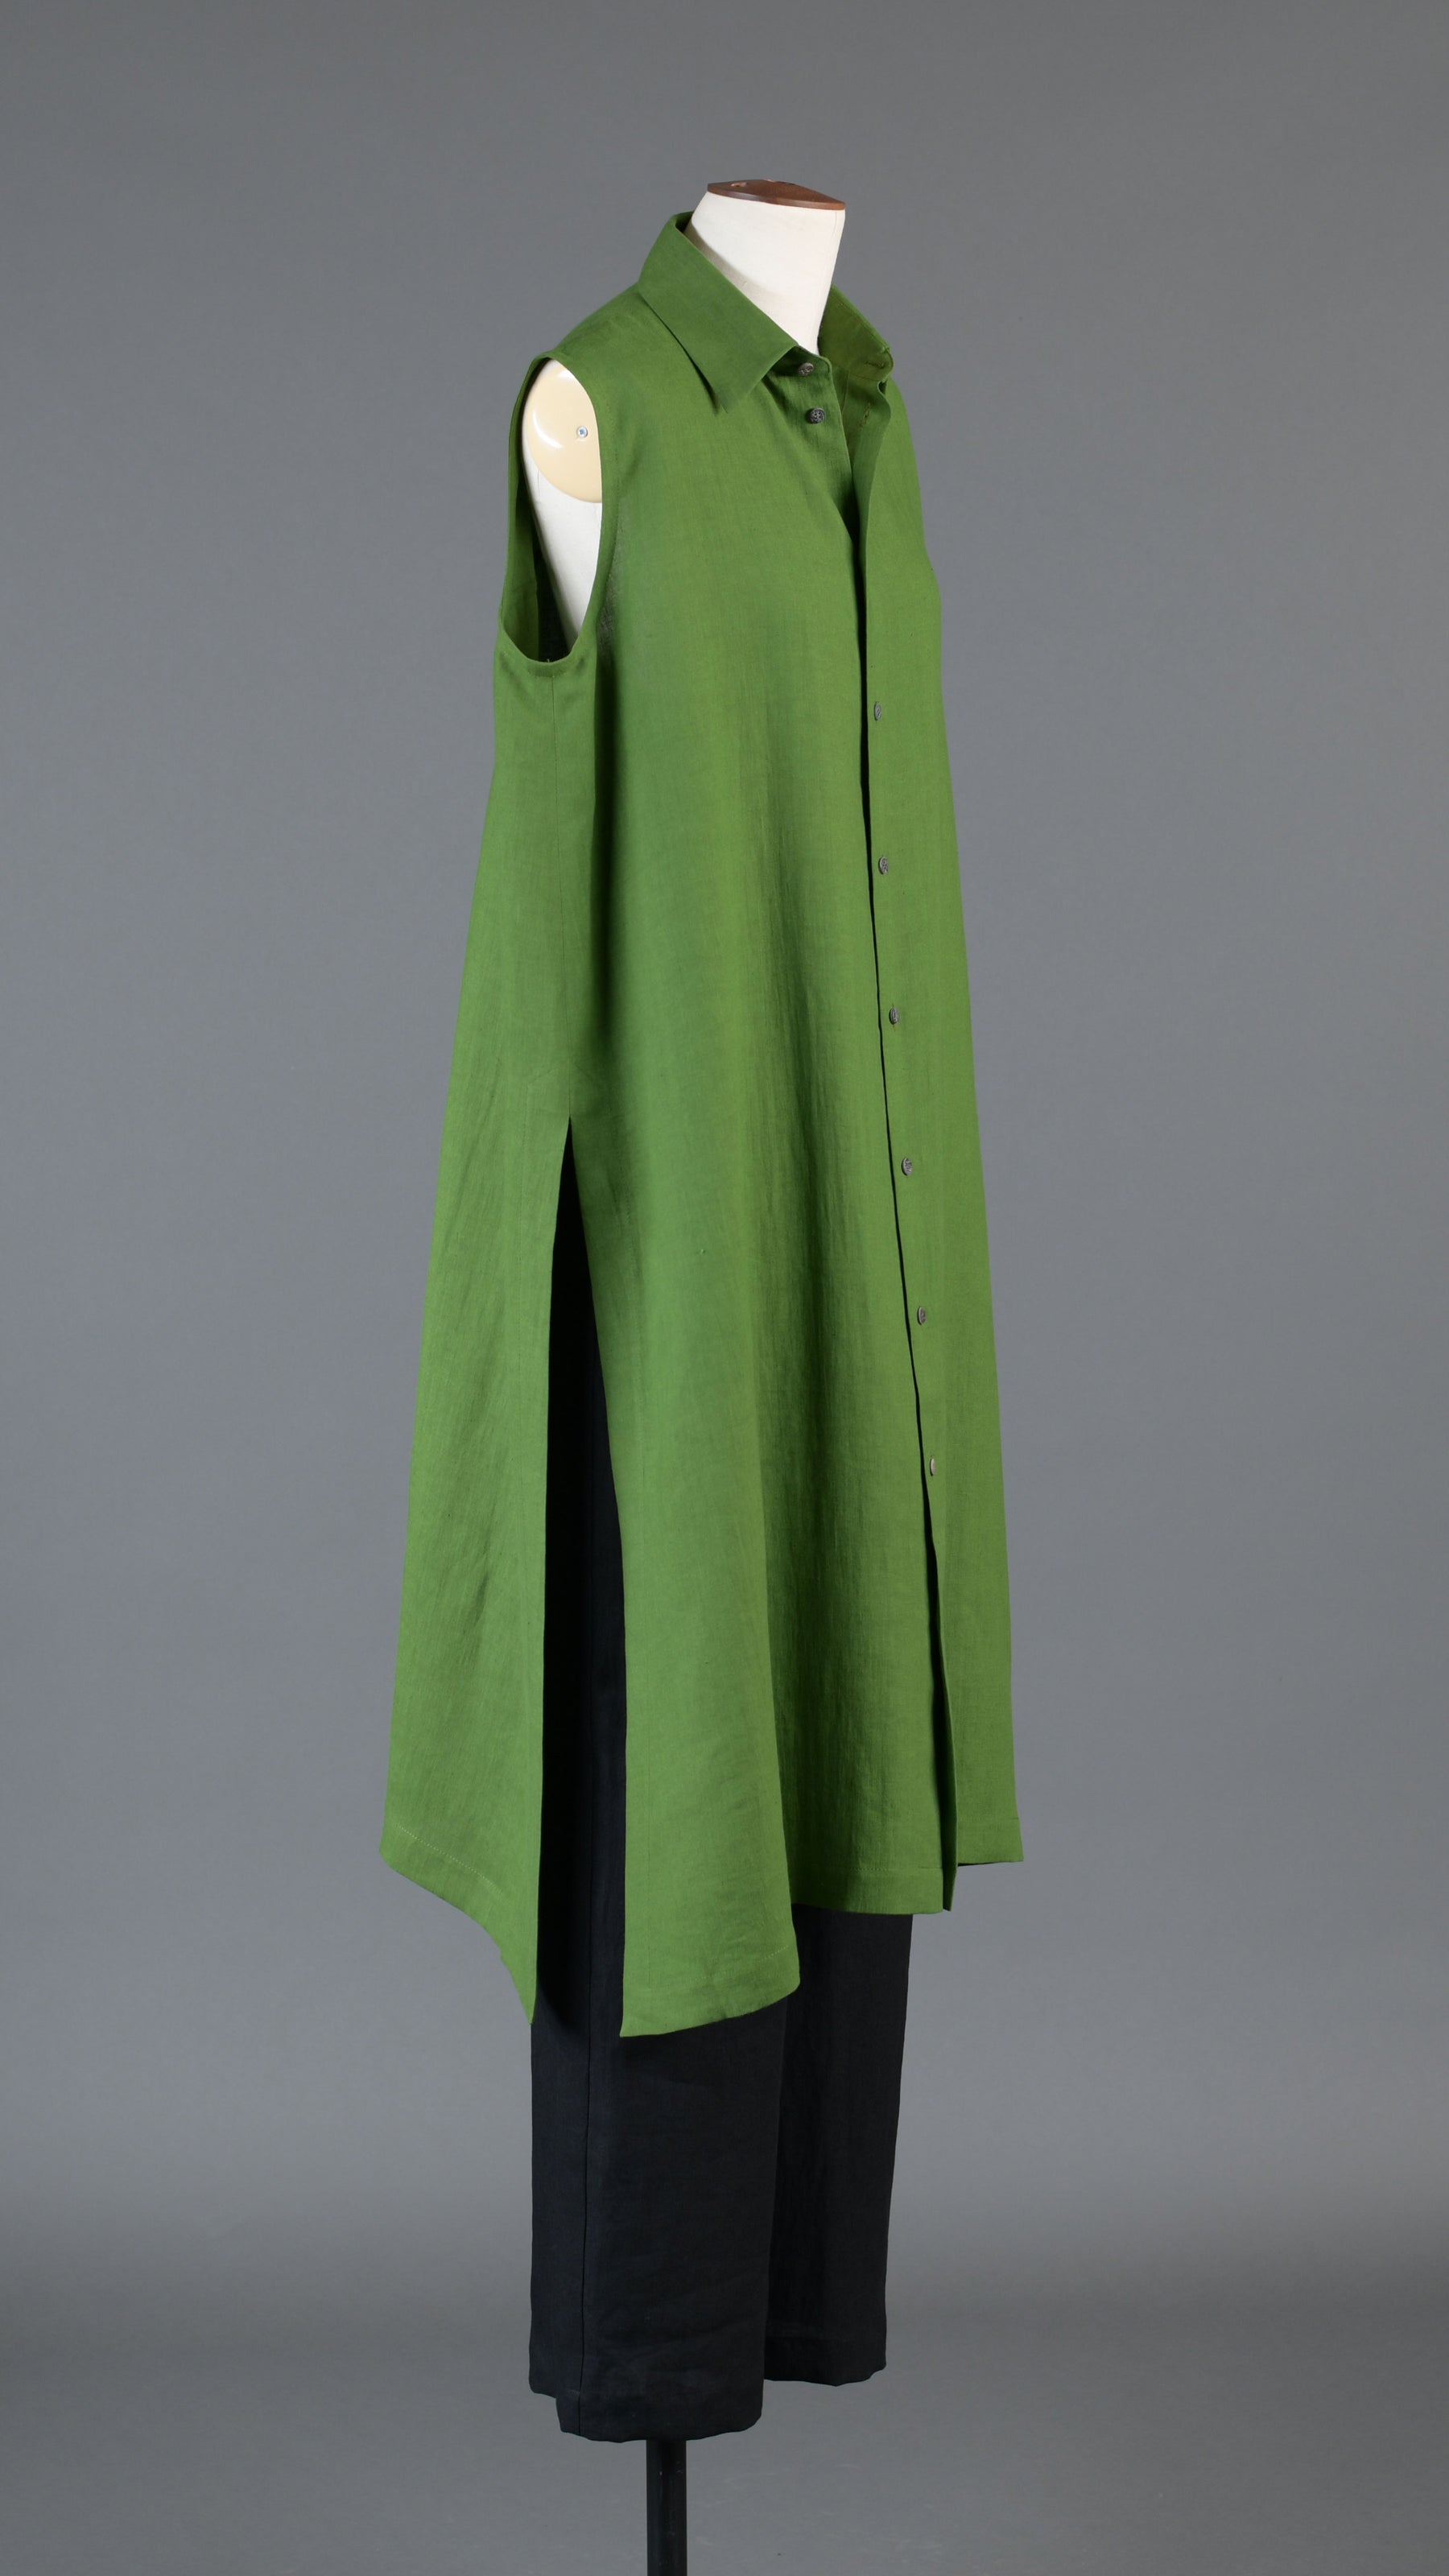 slim a-line sleeveless shirt dress with collar and side slit detail in darklime